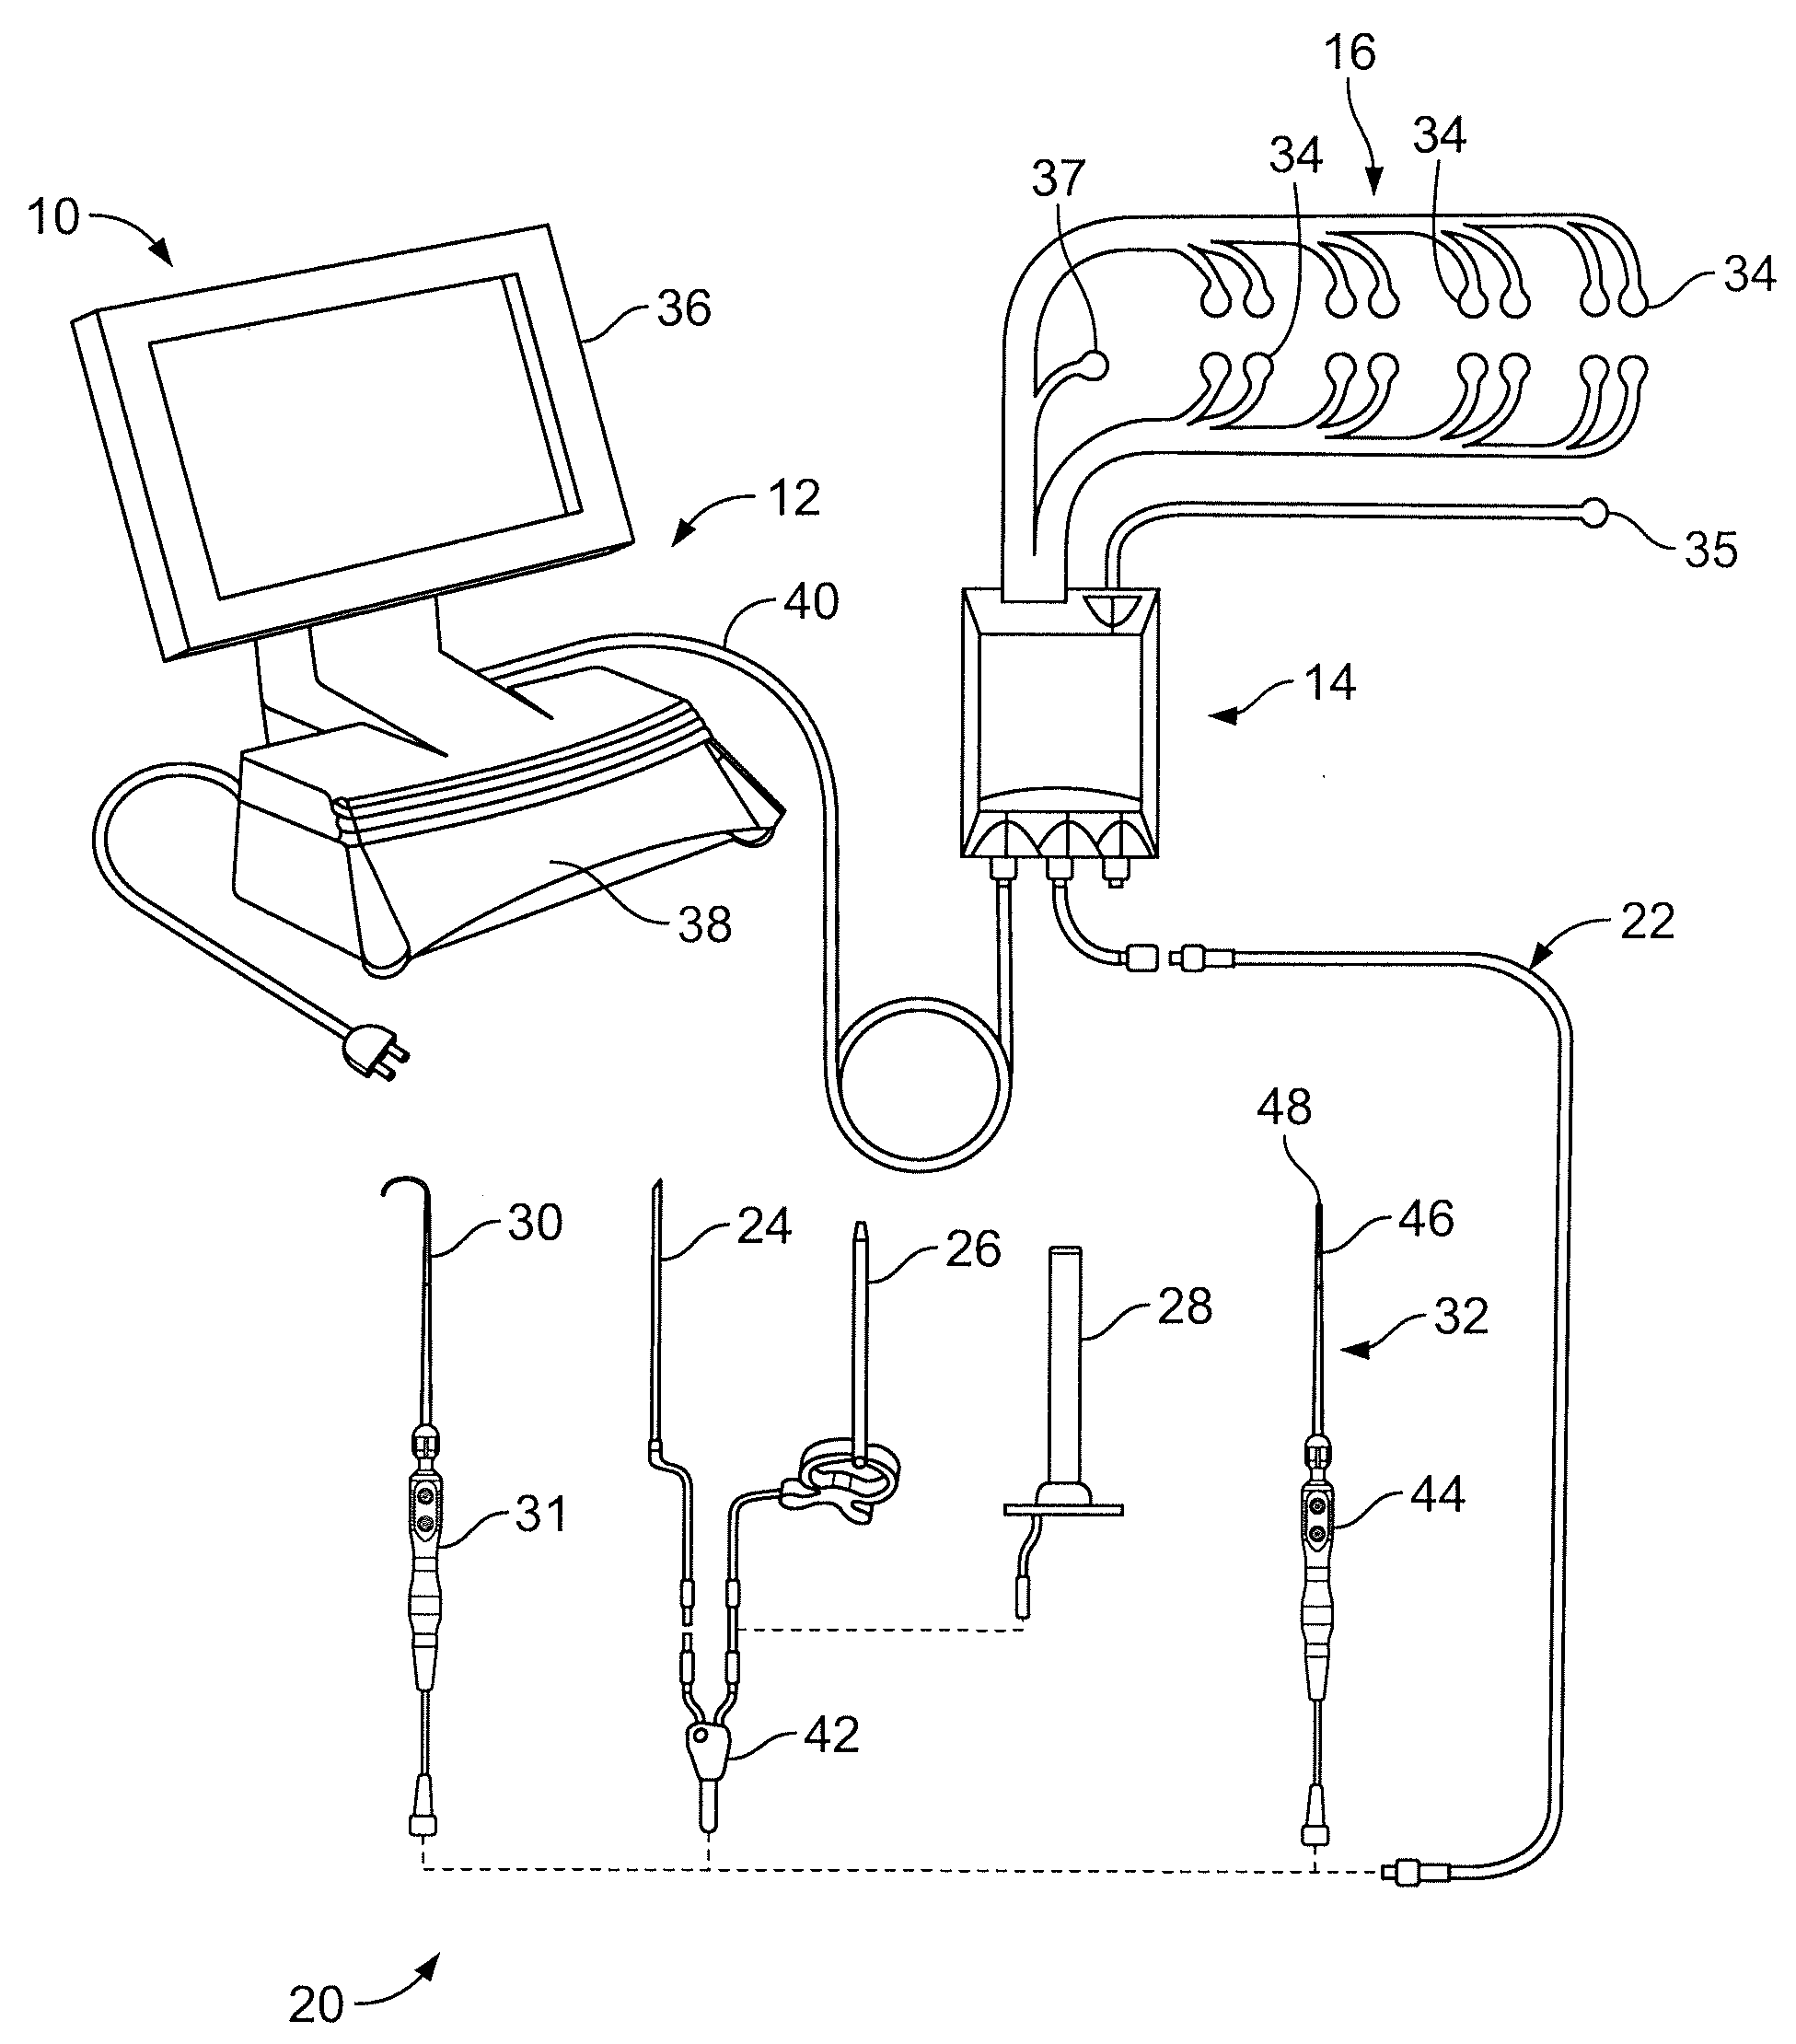 System and Methods for Determining Nerve Proximity, Direction, and Pathology During Surgery